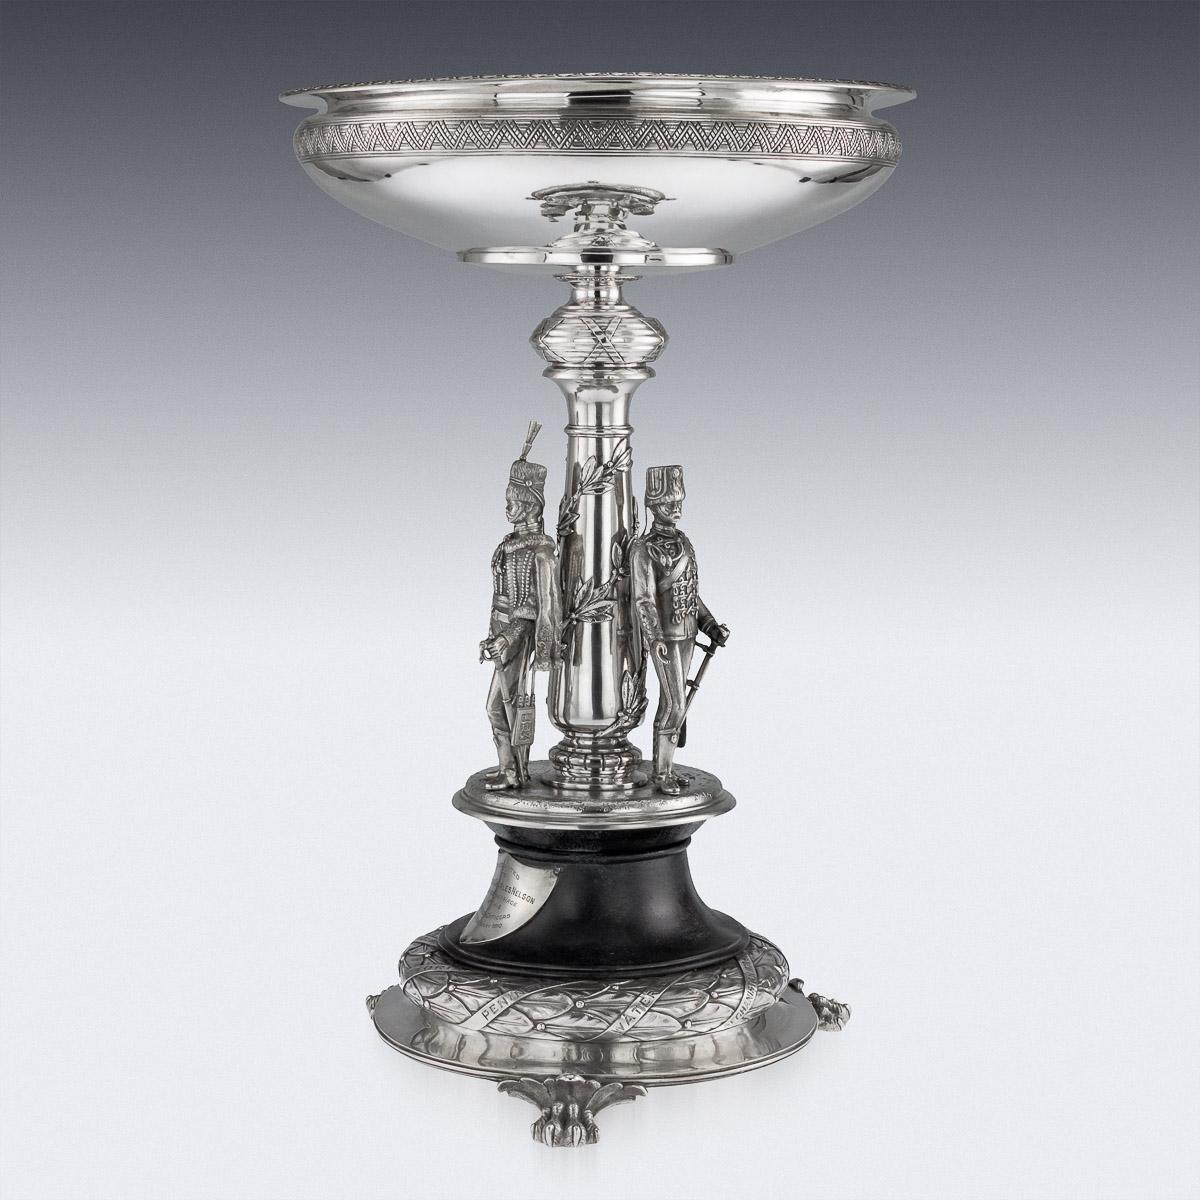 English 20th Century Edwardian Solid Silver 'Kings Hussars' Centrepiece circa 1914